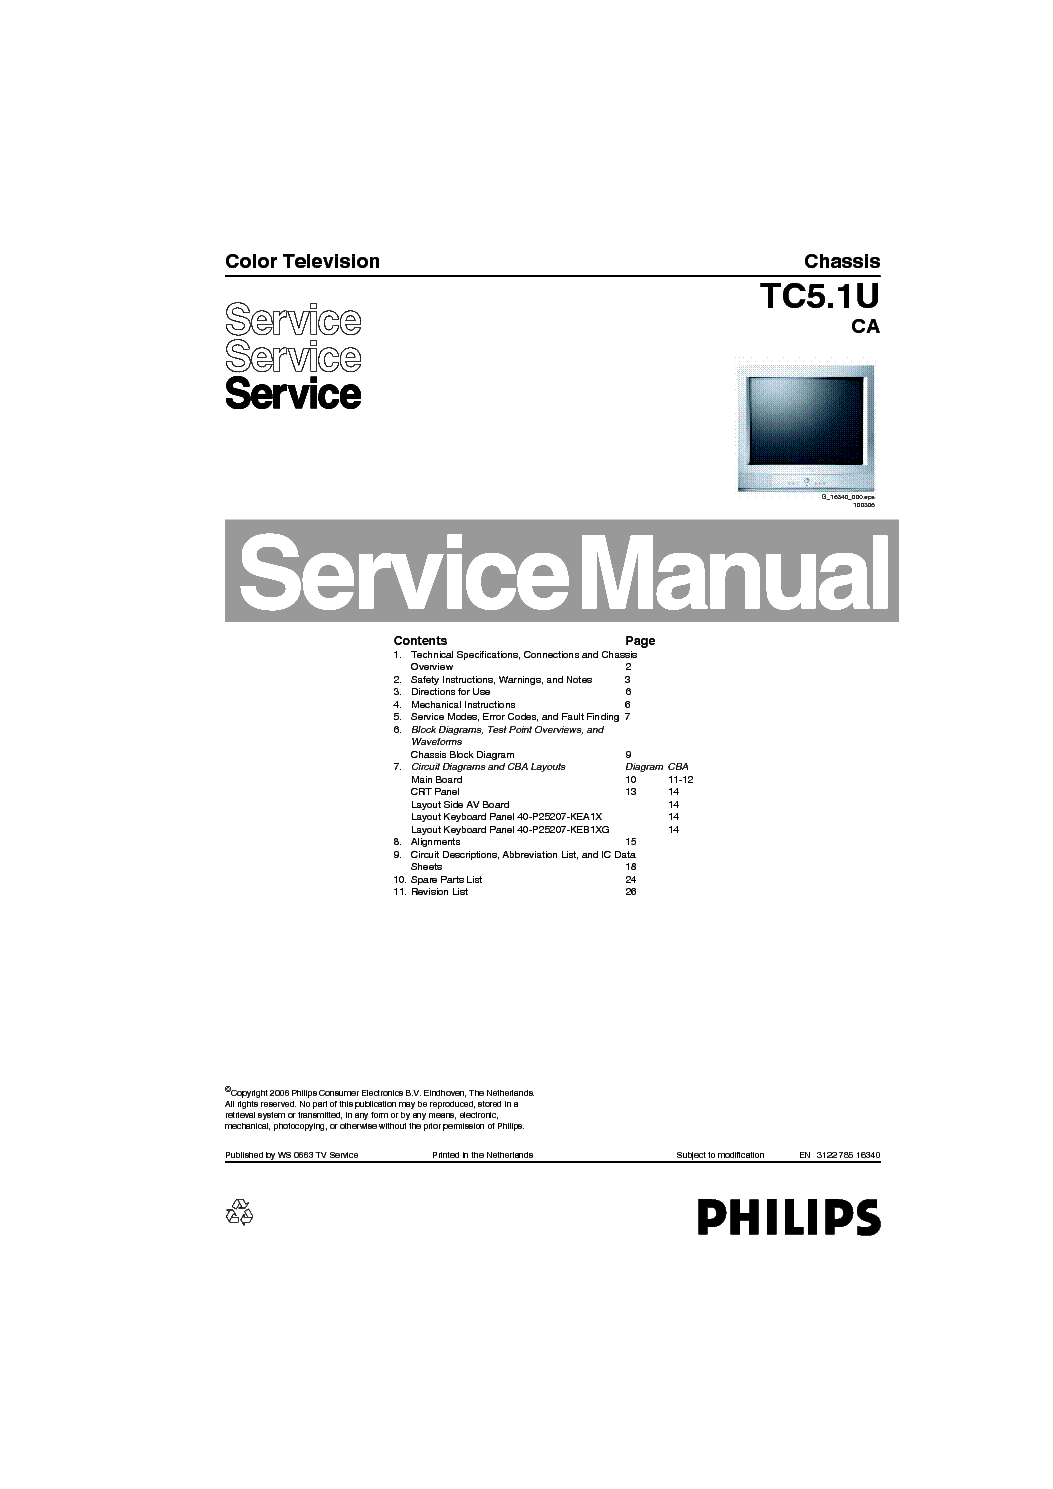 PHILIPS TC5.1U-CA CHASSIS SM service manual (1st page)